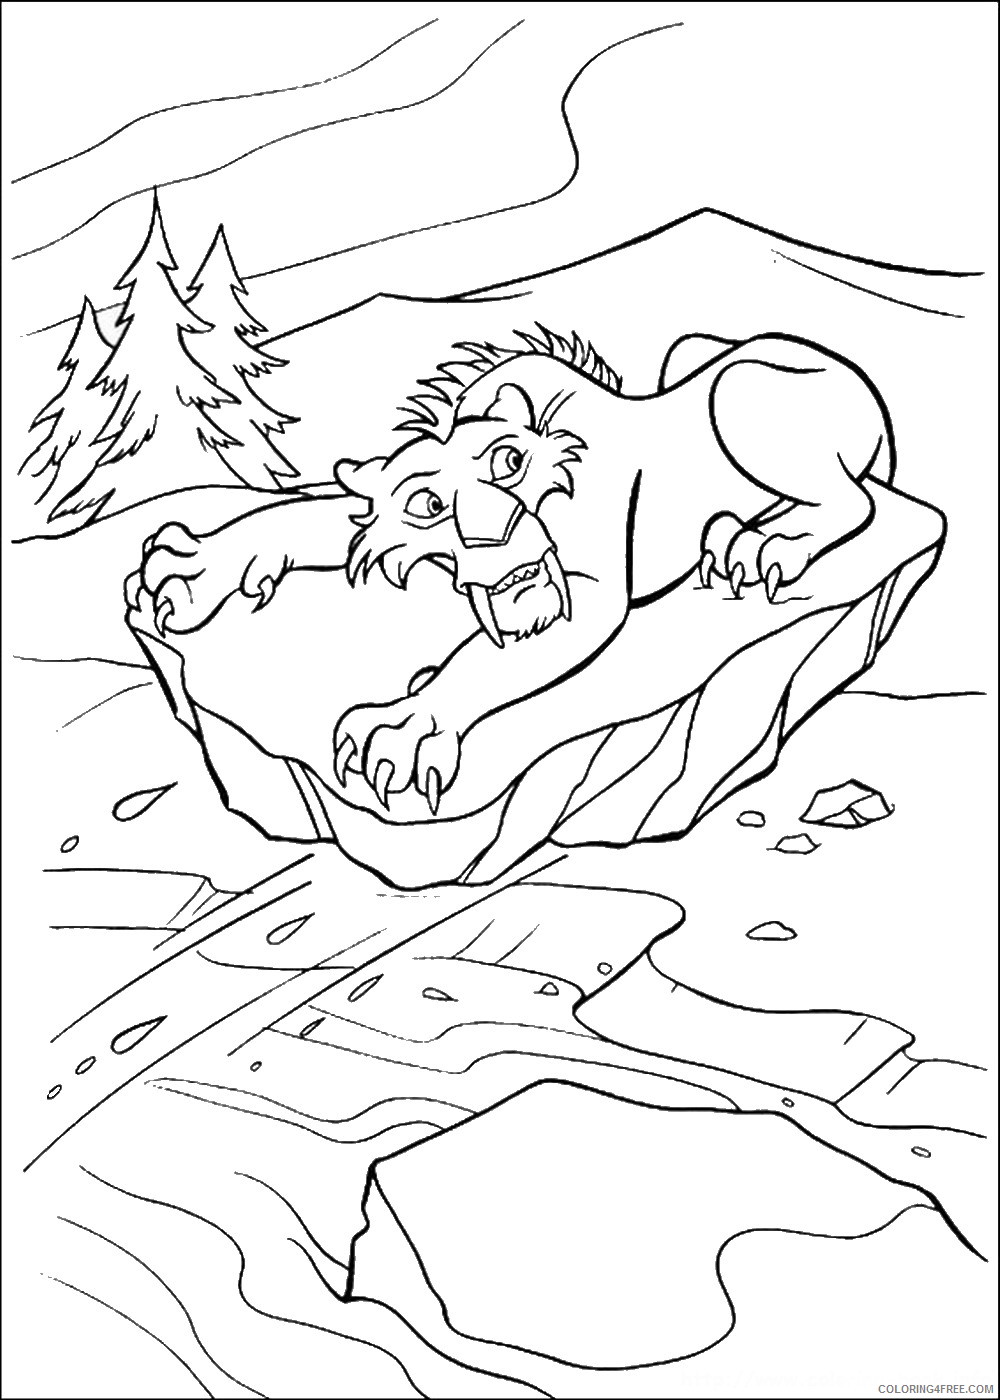 Ice Age Coloring Pages Cartoons ice age 04 Printable 2020 3375 Coloring4free